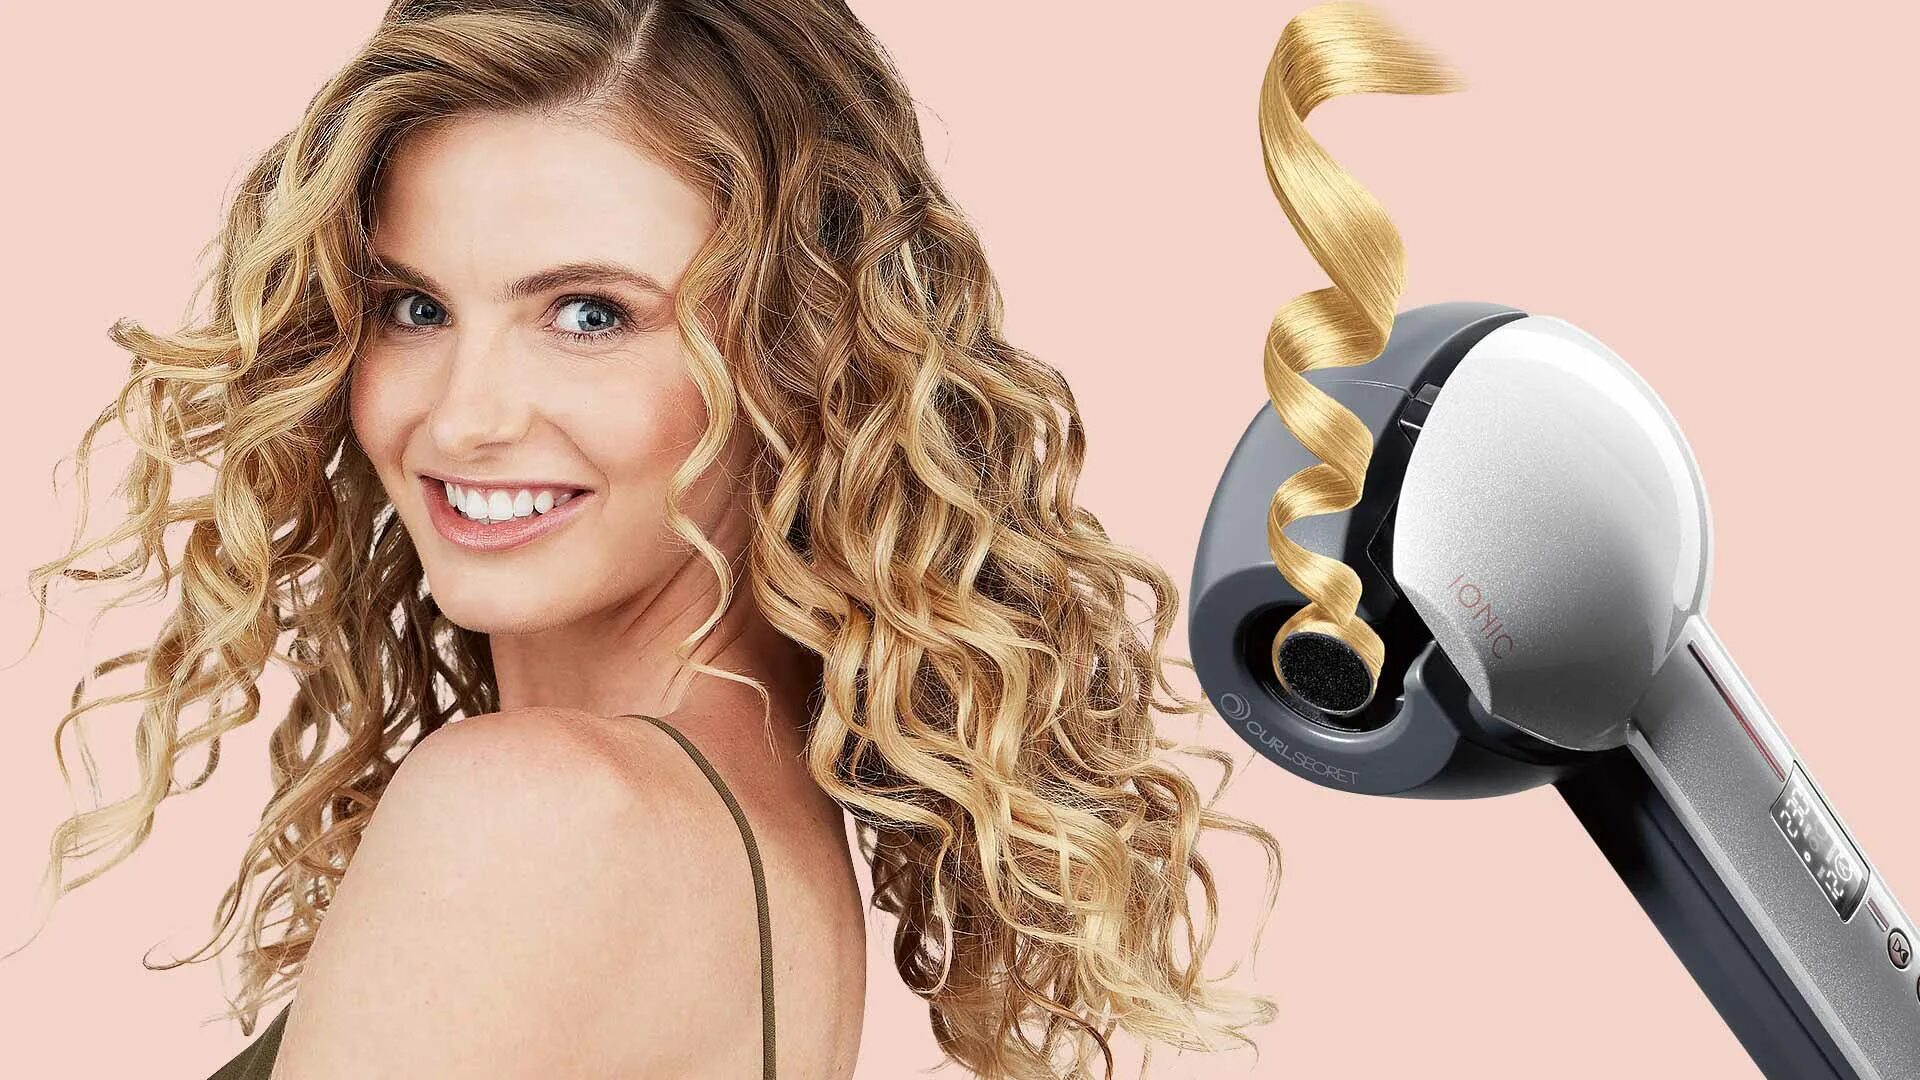 Automatic curler. Стайлер Automatic hair Curler. Стайлер upgrade Automatic Curler. Encora hair Curler стайлер. Стайлер upgrade Automatic Curler производитель.